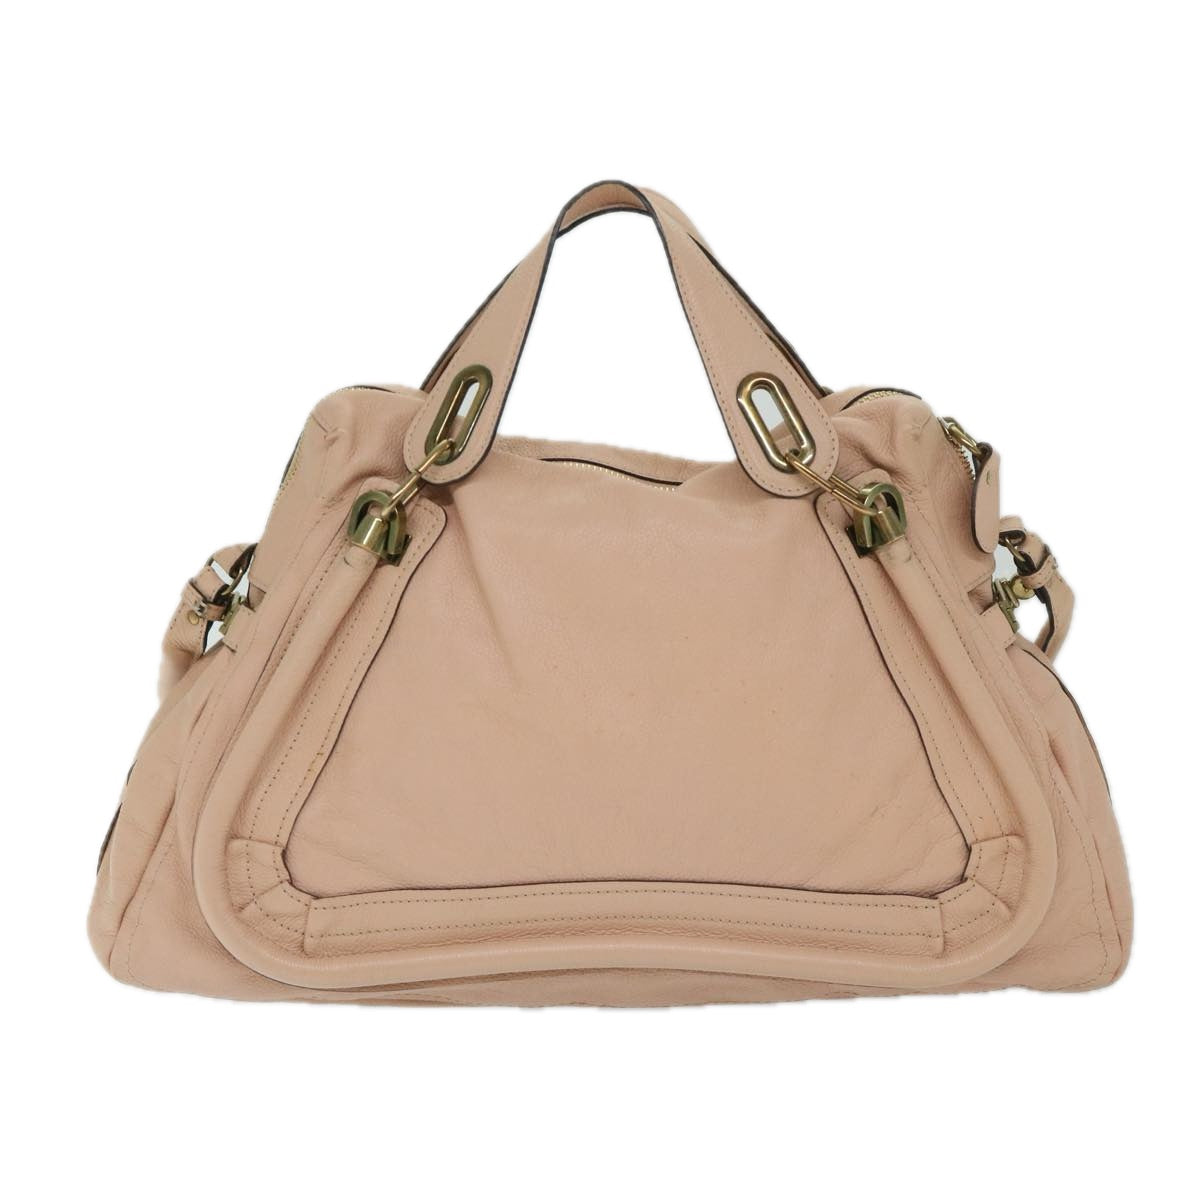 Chloe Paraty Hand Bag Leather 2way Pink Auth bs12541 - 0